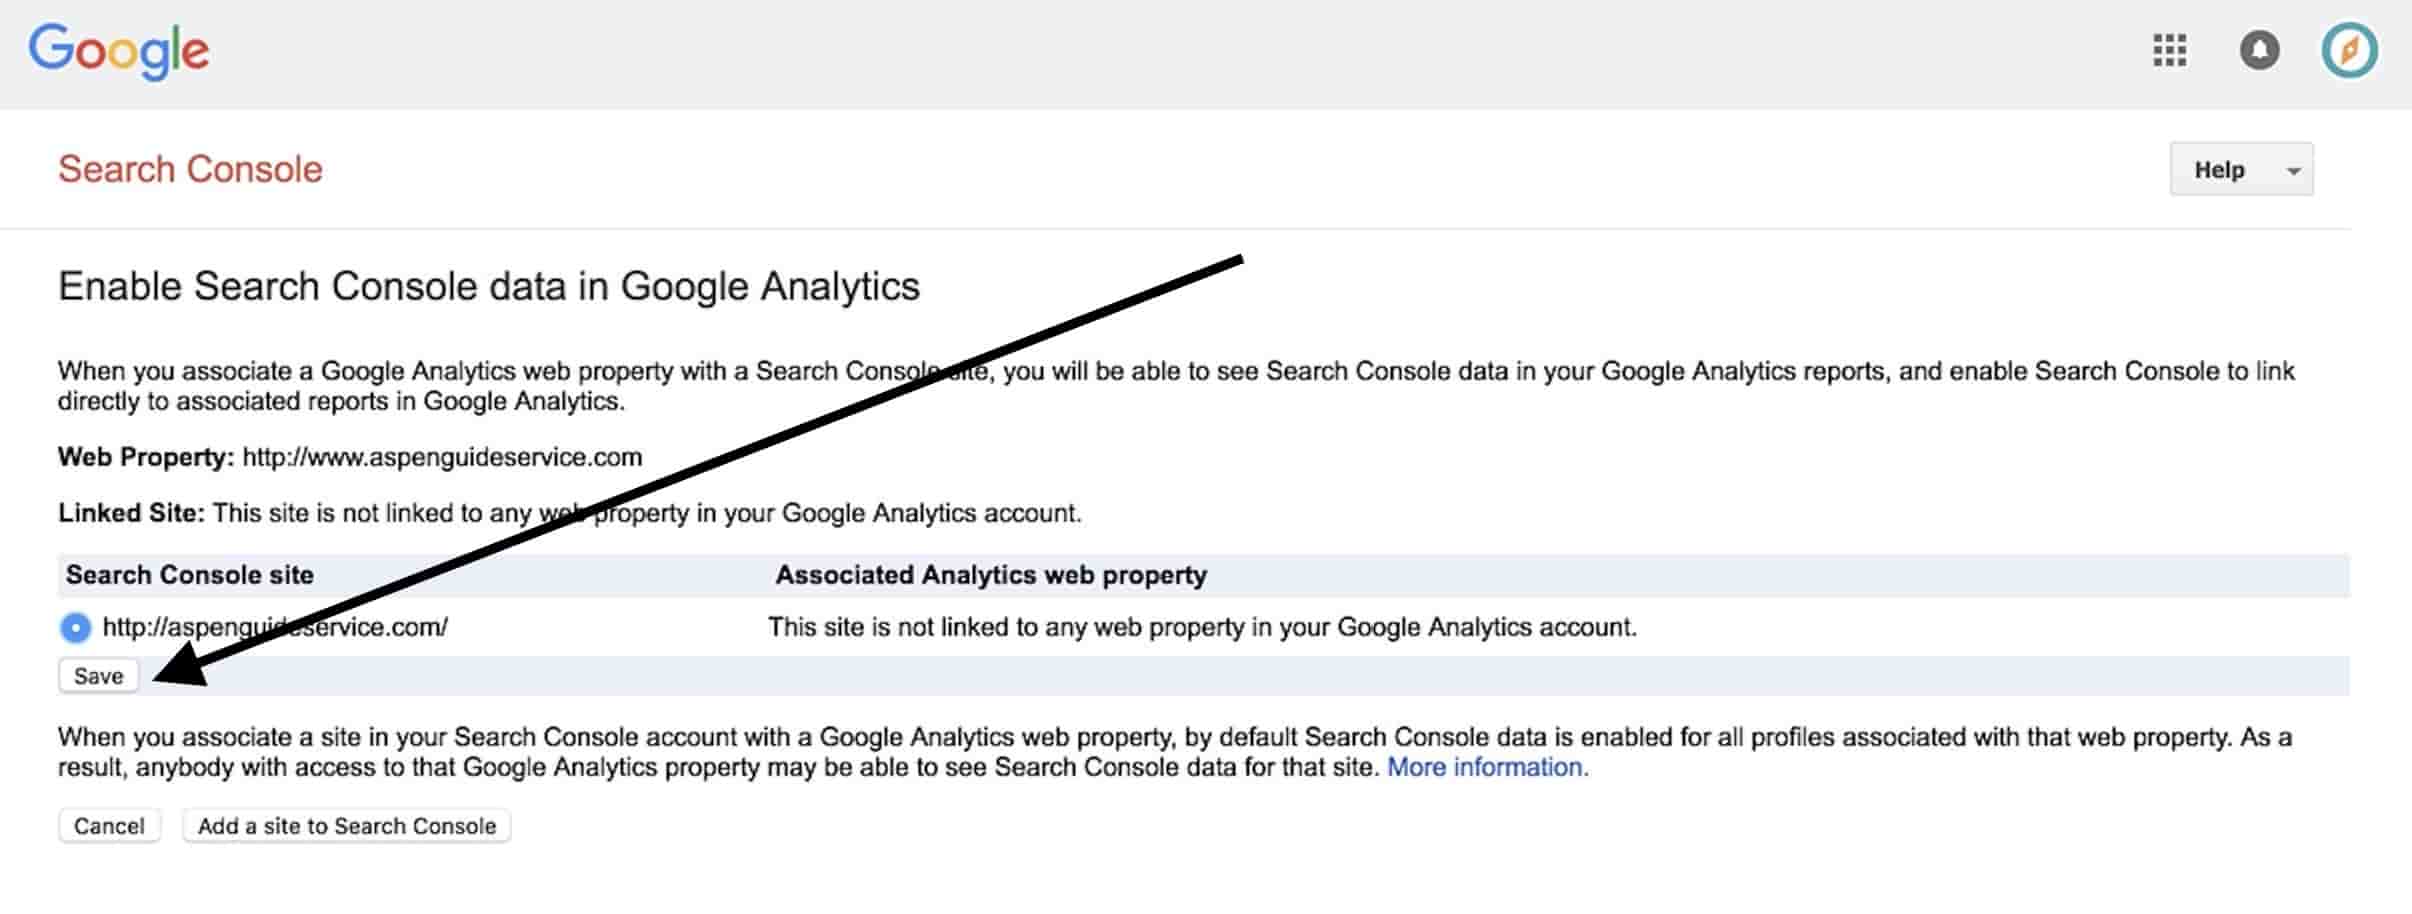 link-google-analytics-to-search-console_Save-min